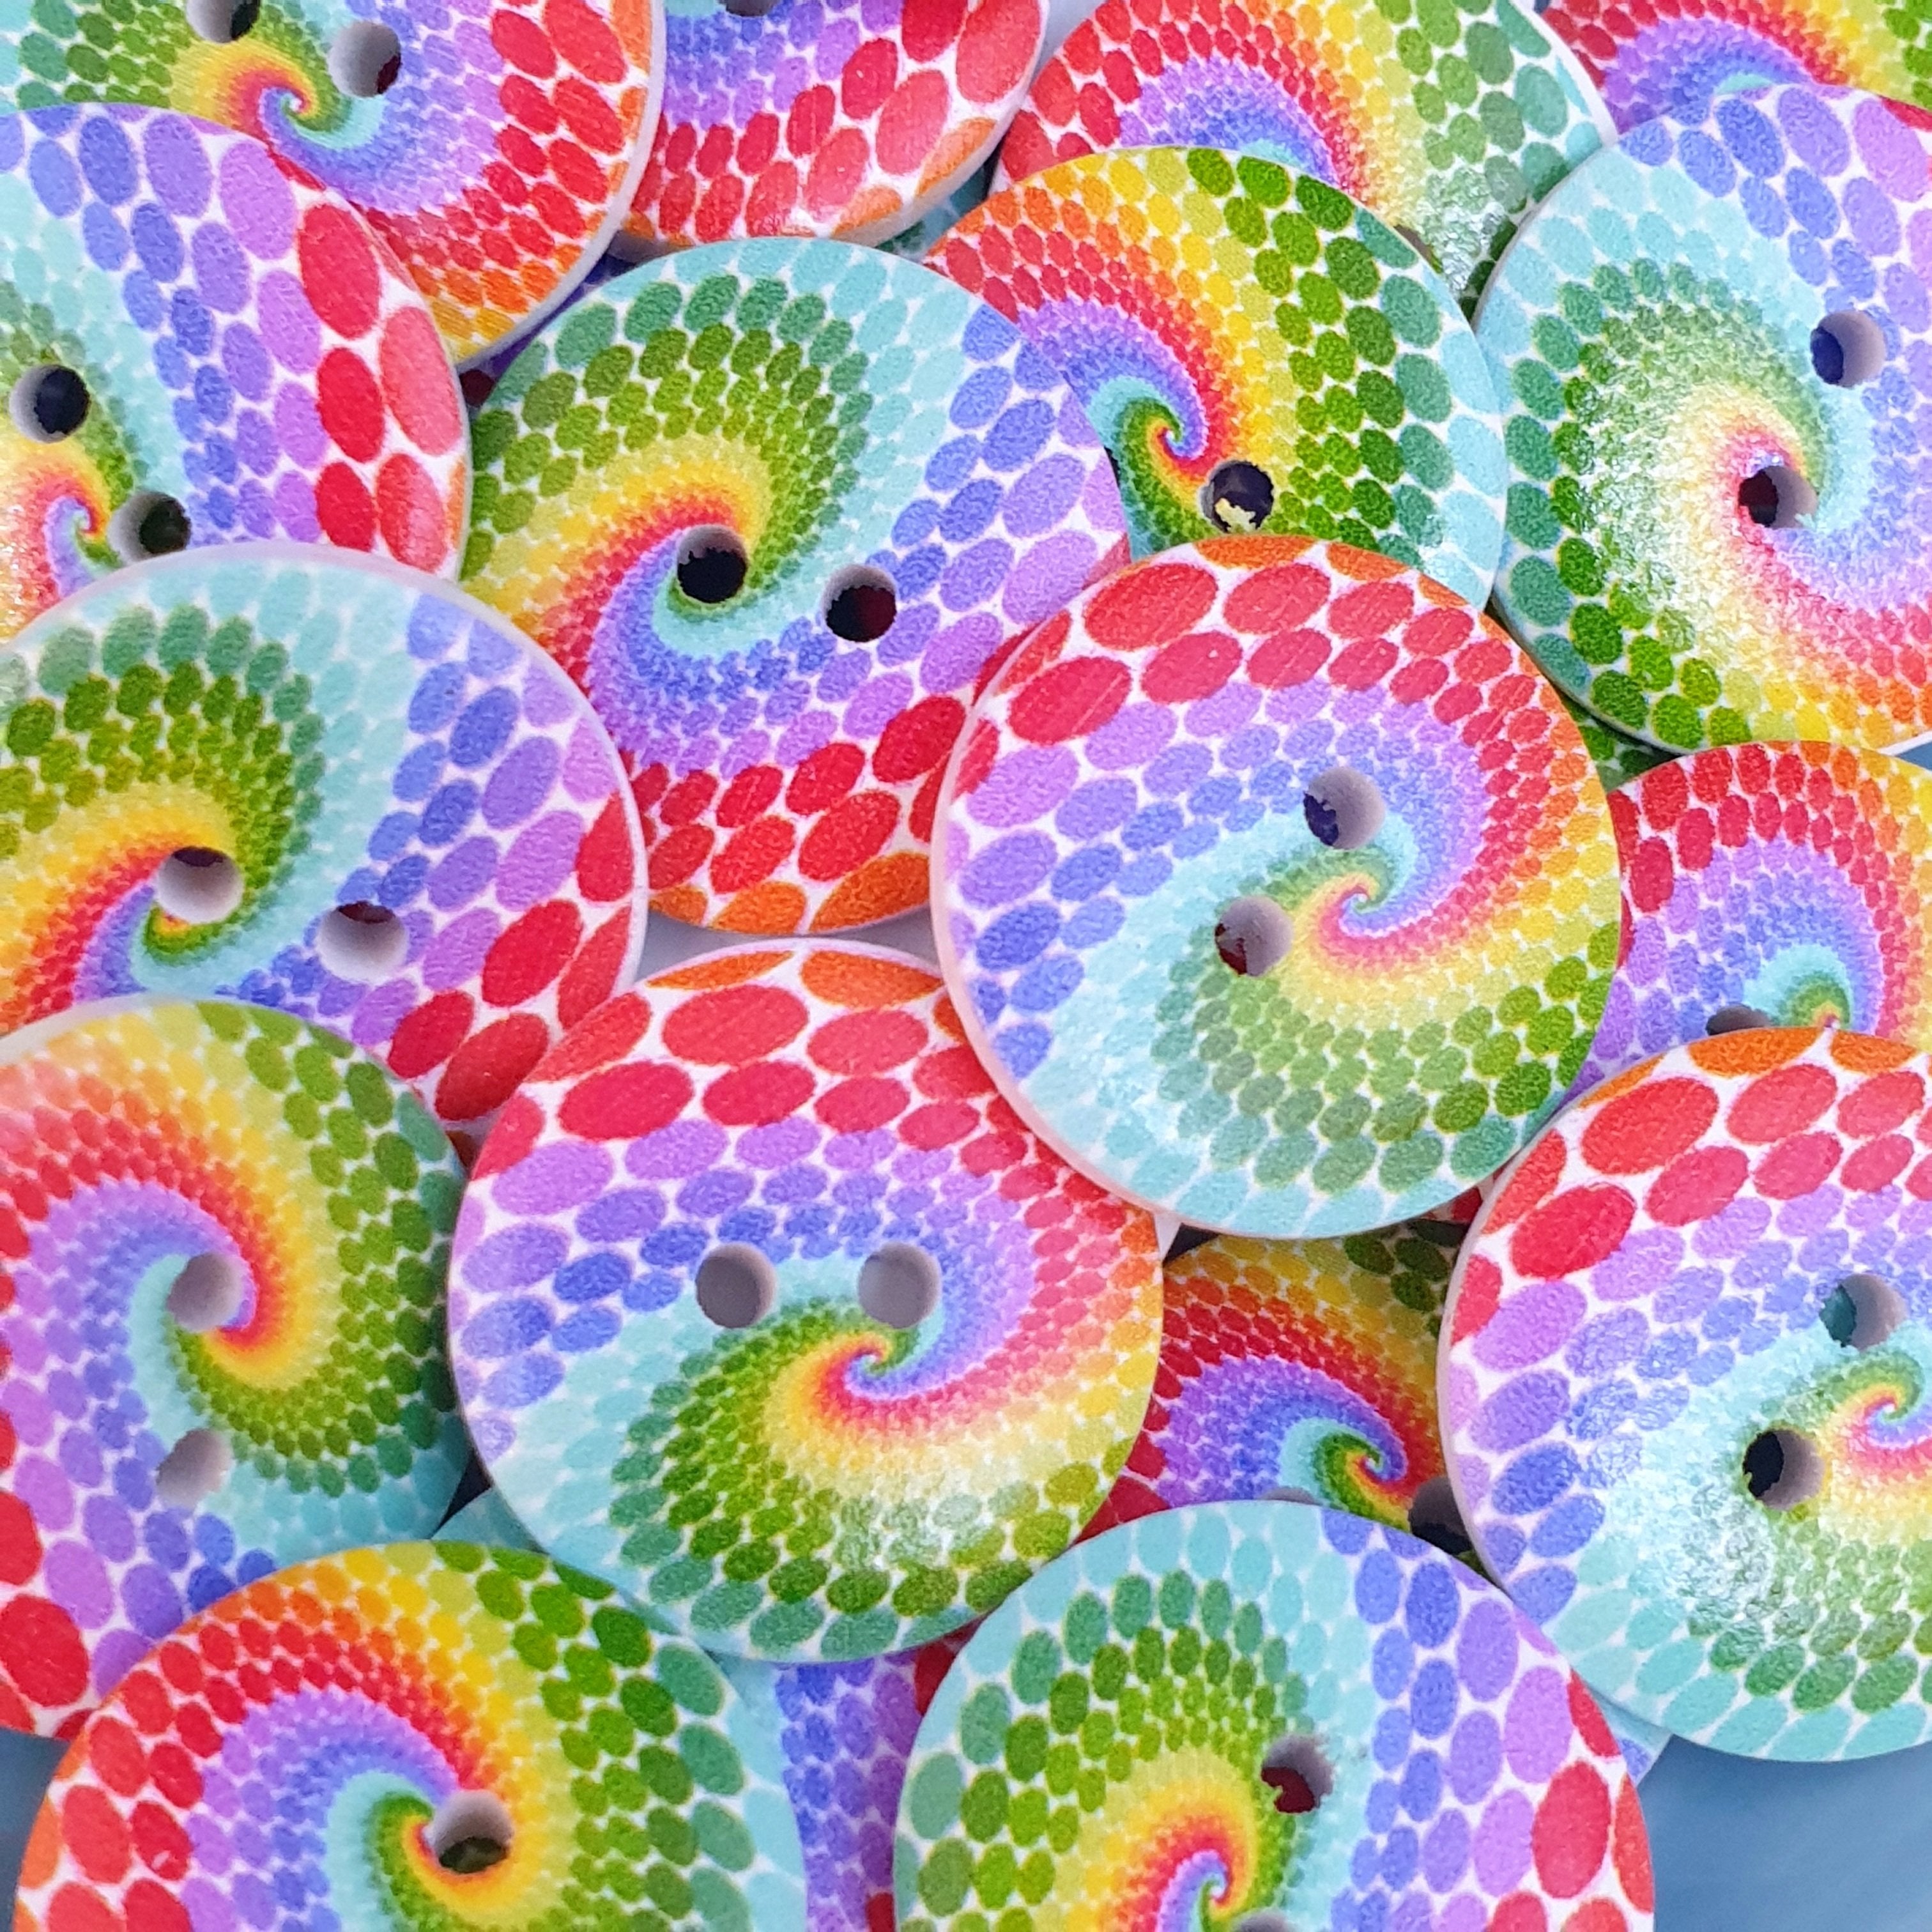 MajorCrafts Rainbow Swirl Pattern 2 Holes Round Wooden Sewing Buttons